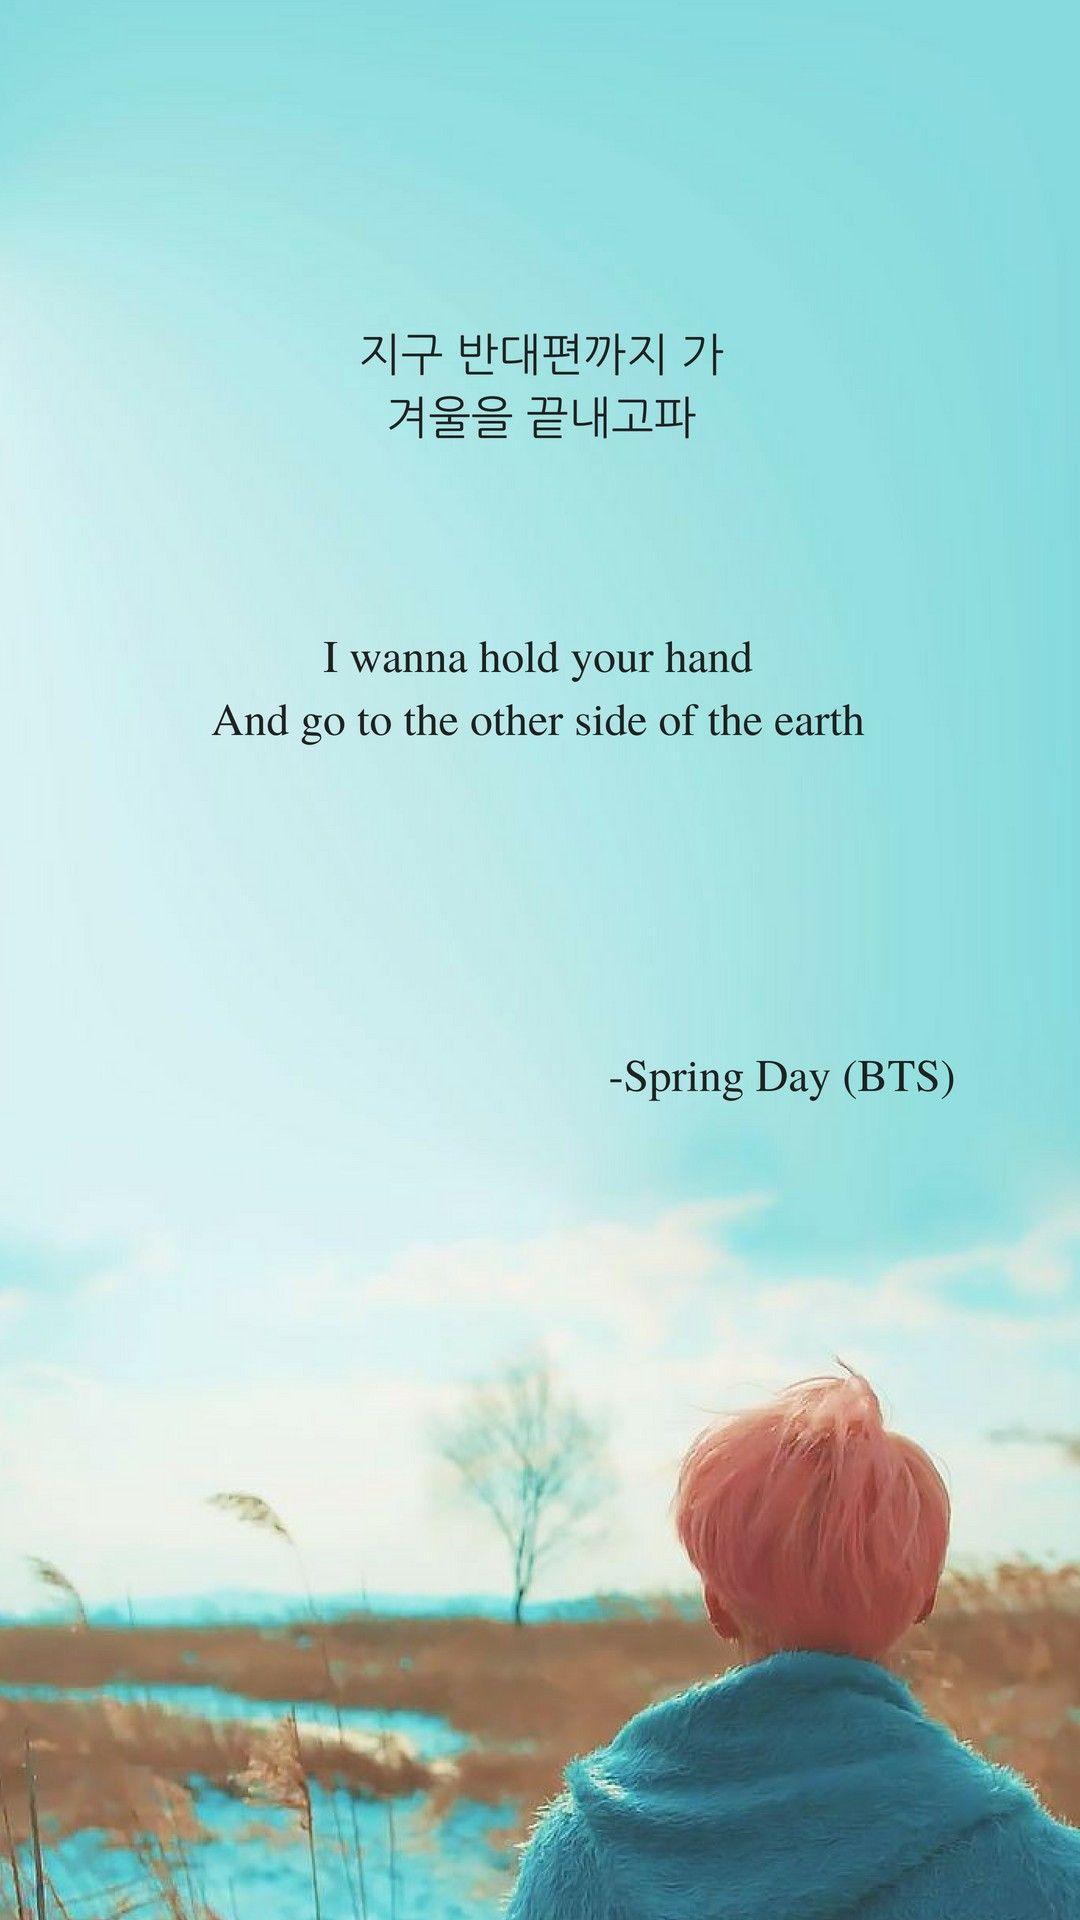 Free download Spring Day by BTS Lyrics wallpaper in 2019 Bts song